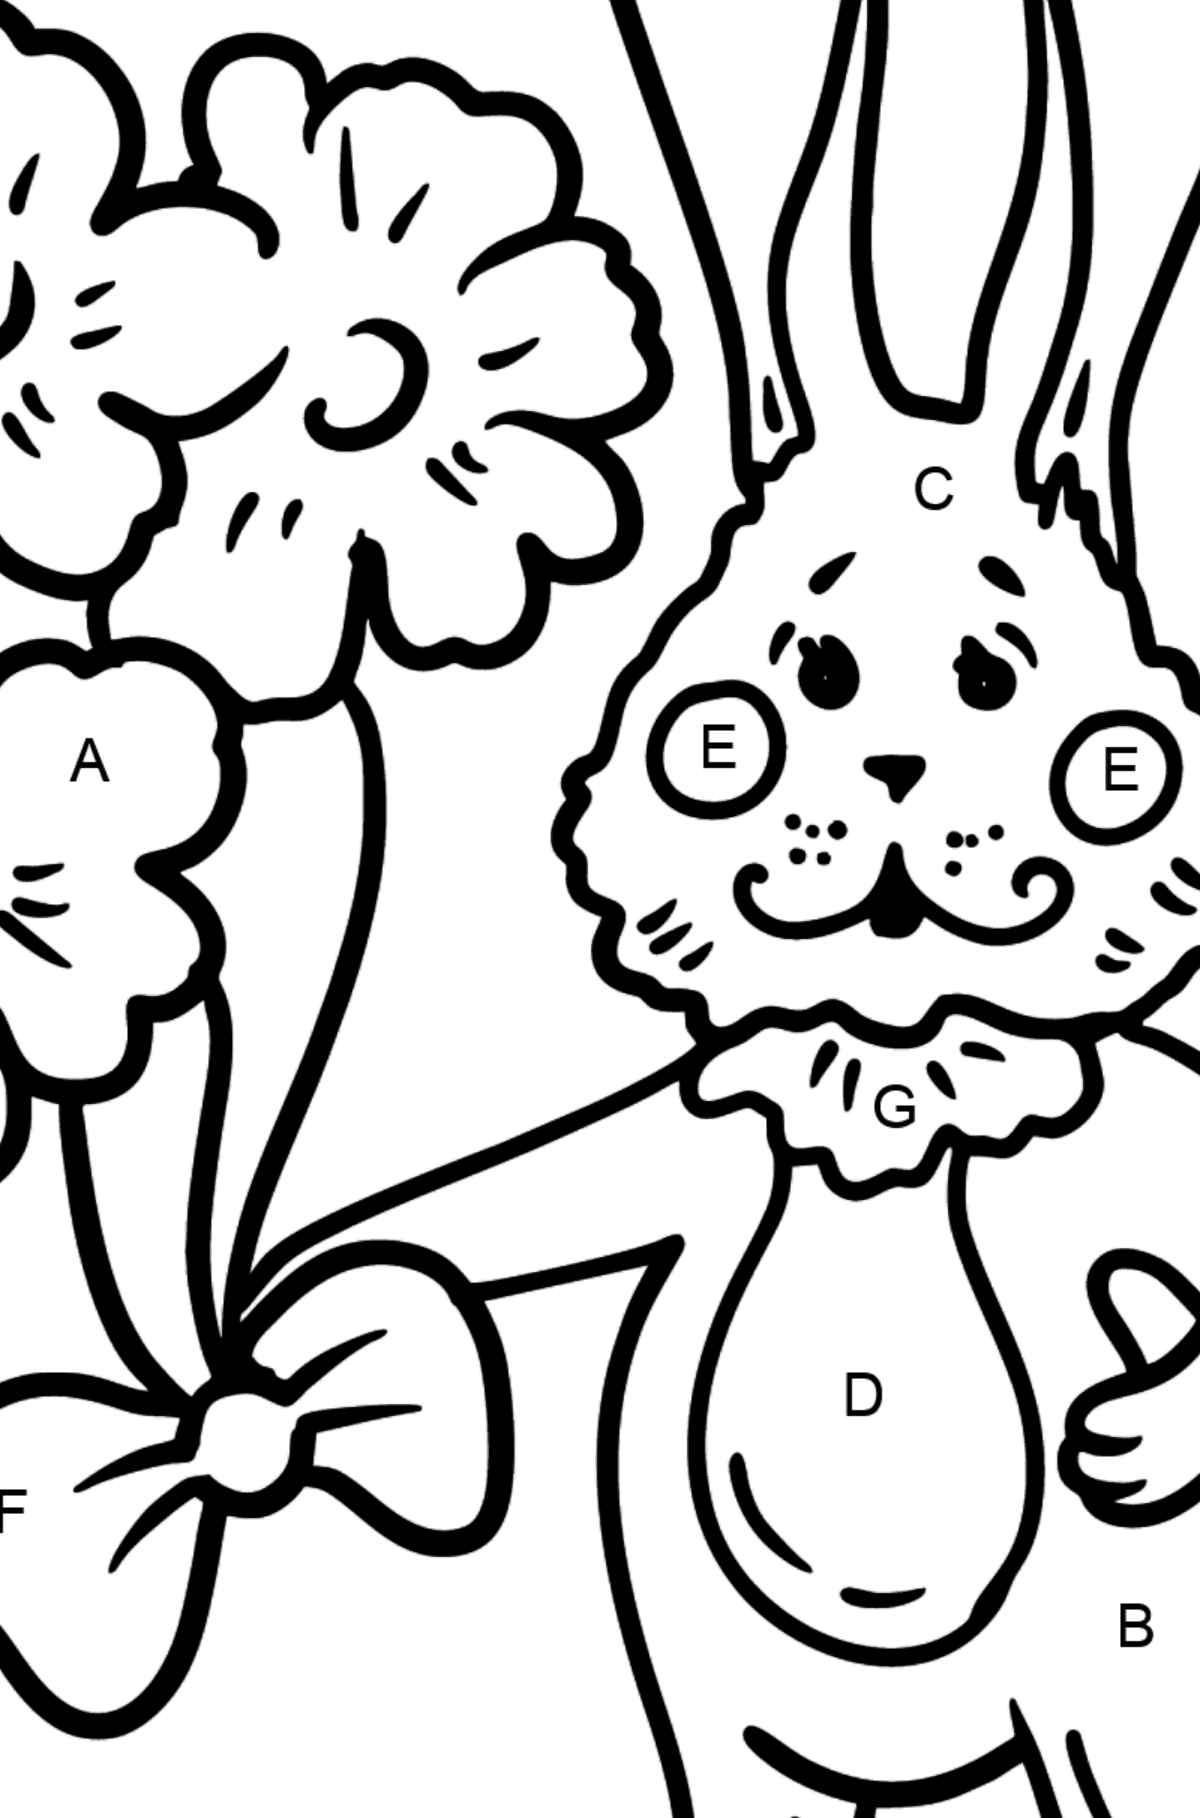 Bunny with a Bouquet of Flowers coloring page - Coloring by Letters for Kids